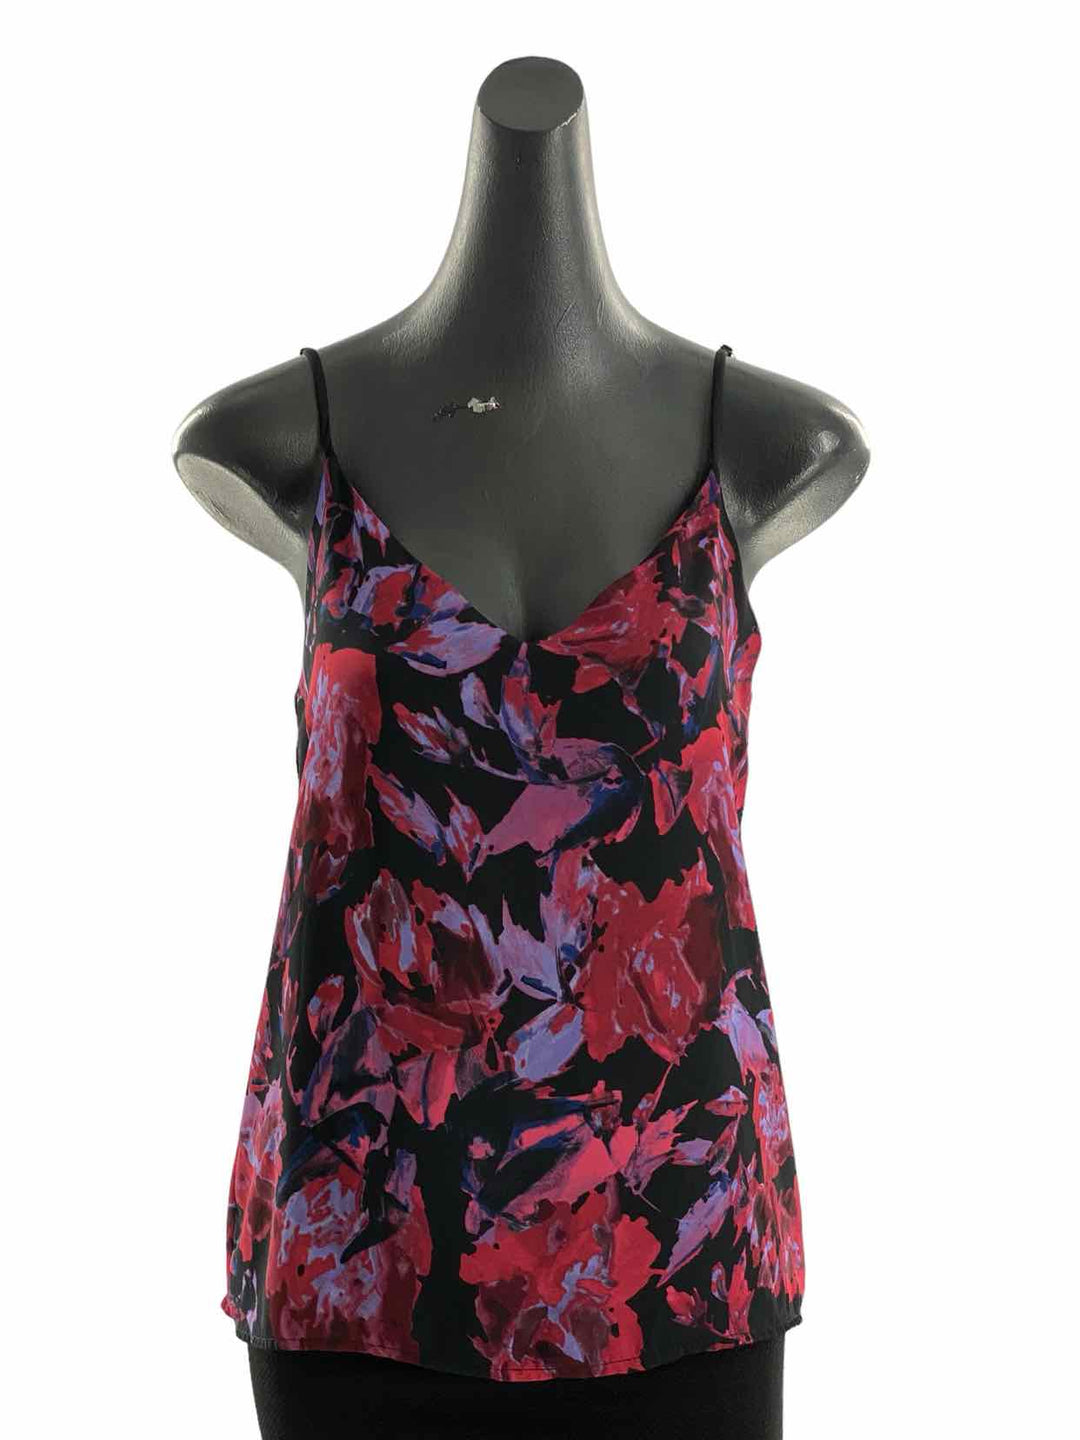 Eight Sixty Size M Black Pink Floral Tank Top